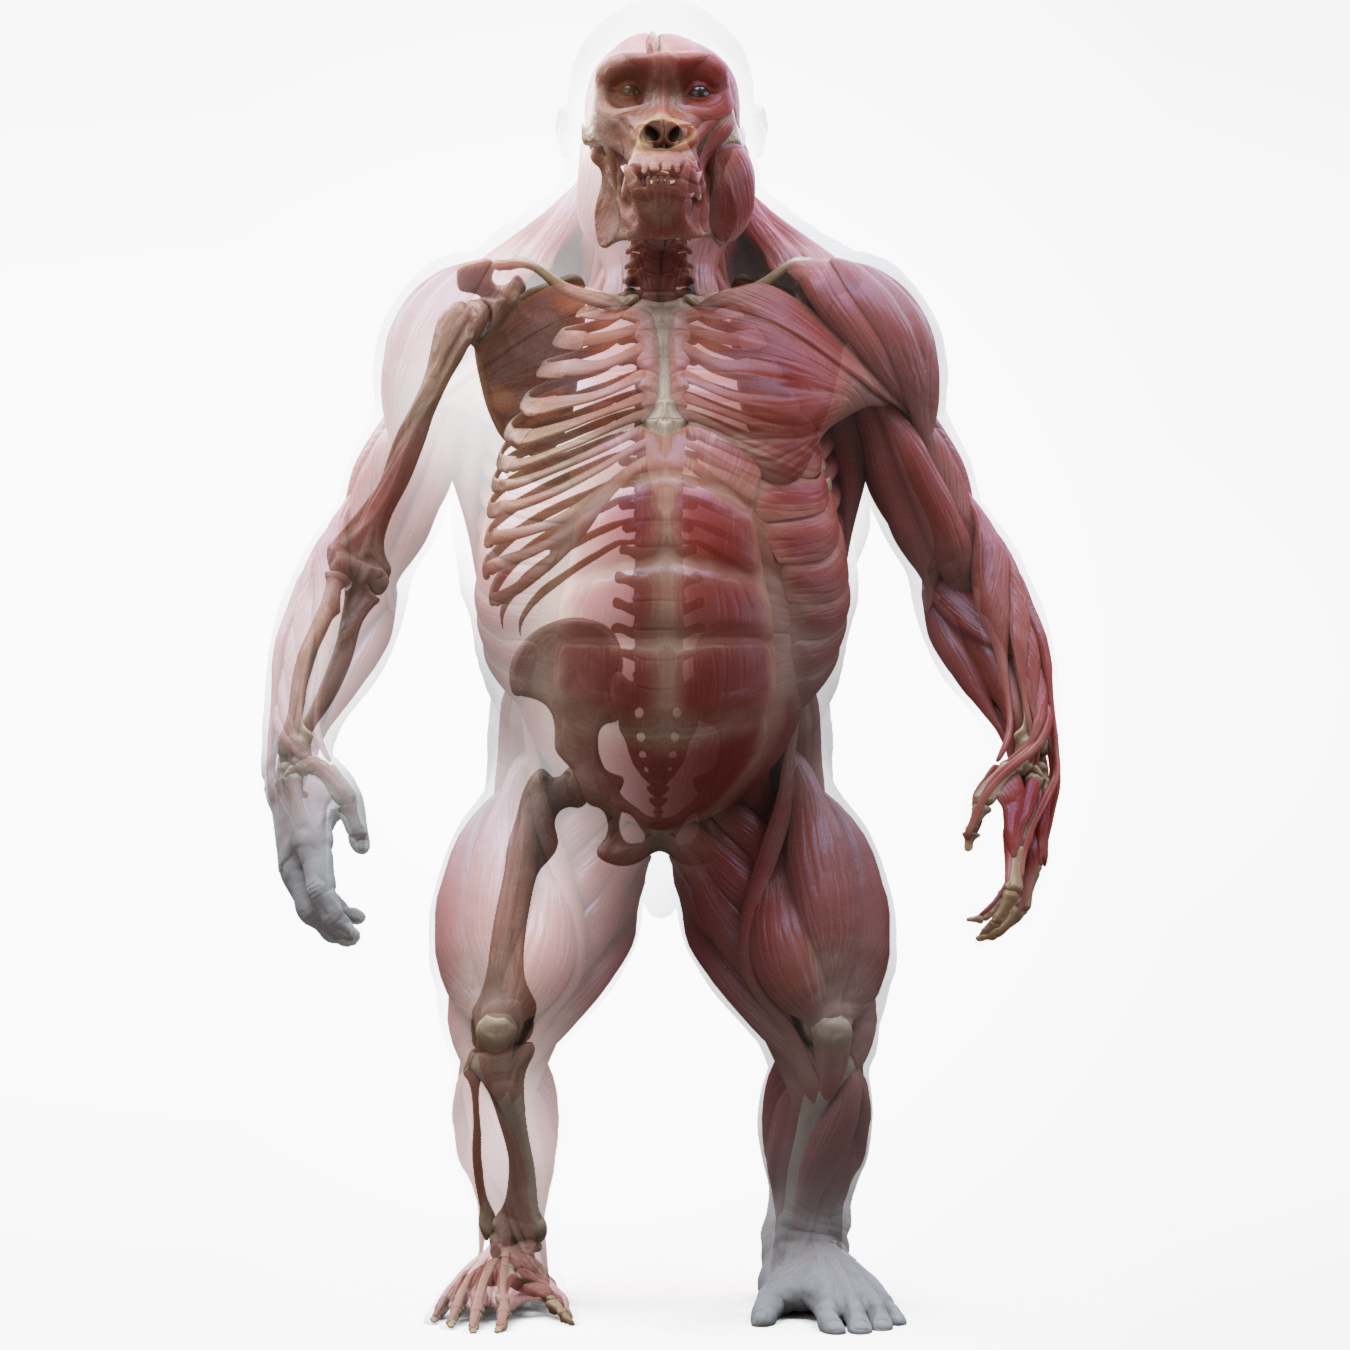 Detail of a male anatomical ecorche model, displaying muscles